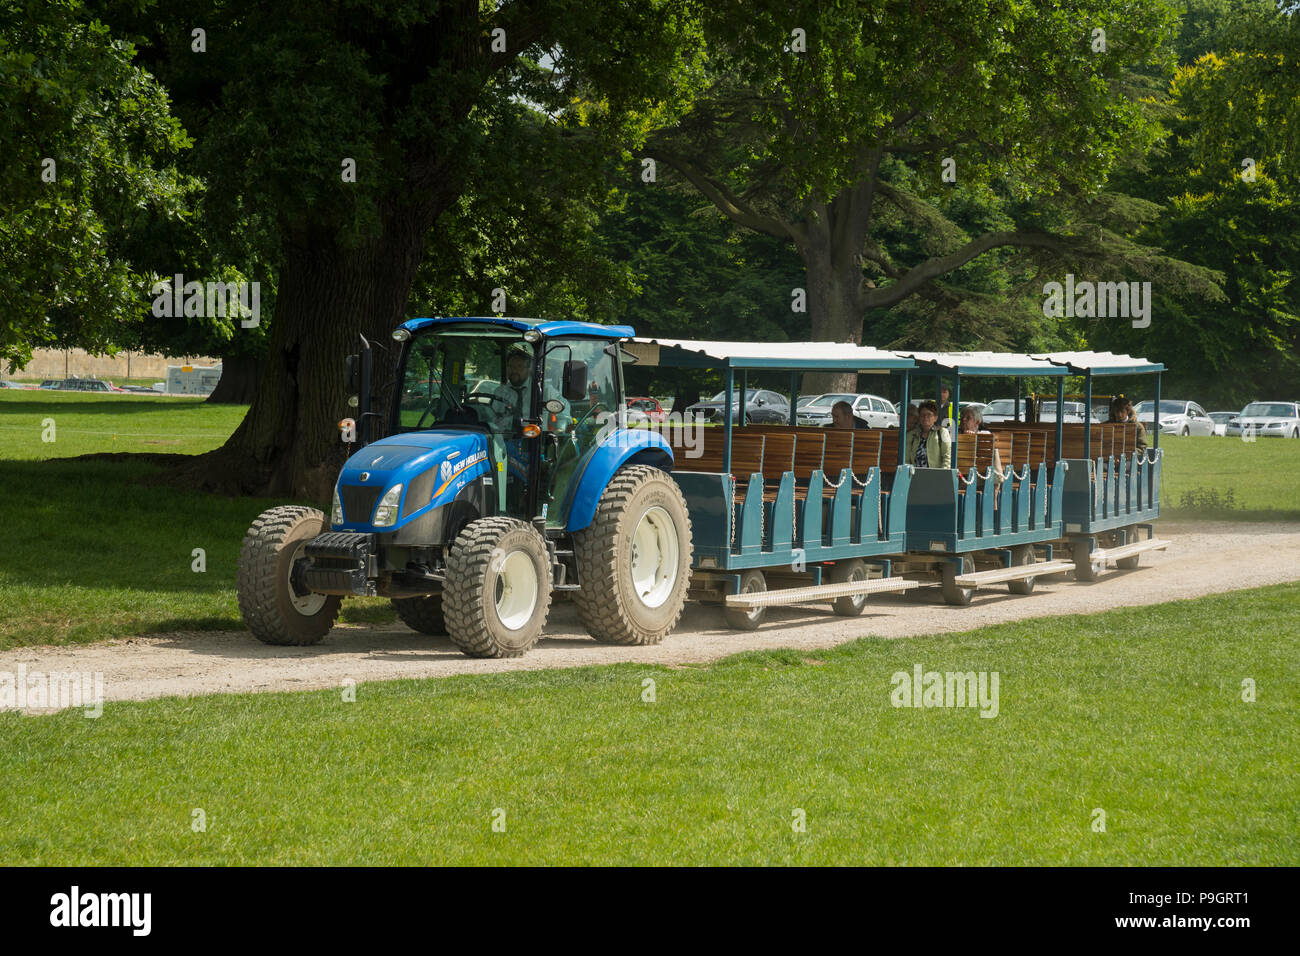 Visitors arriving at showground, transported from car park in carriages pulled by blue tractor - RHS Chatsworth Flower Show, Derbyshire, England, UK. Stock Photo